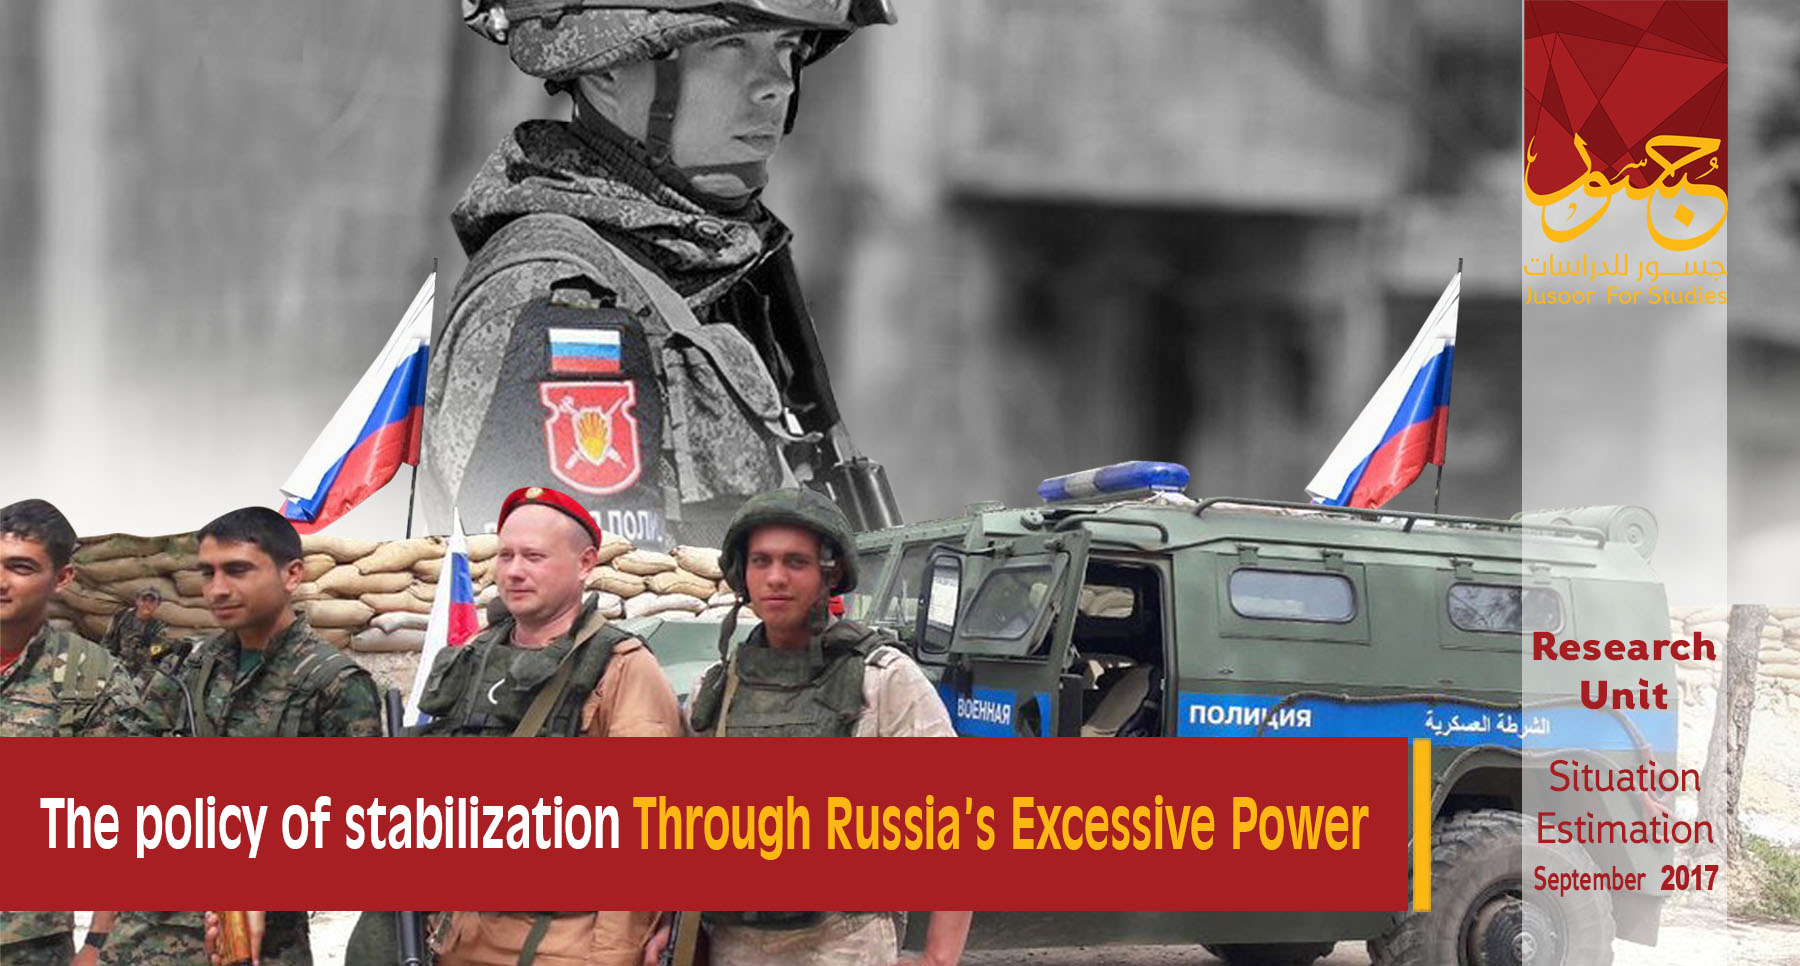 The Policy of Imposing Stability Through Russia's Excessive Power